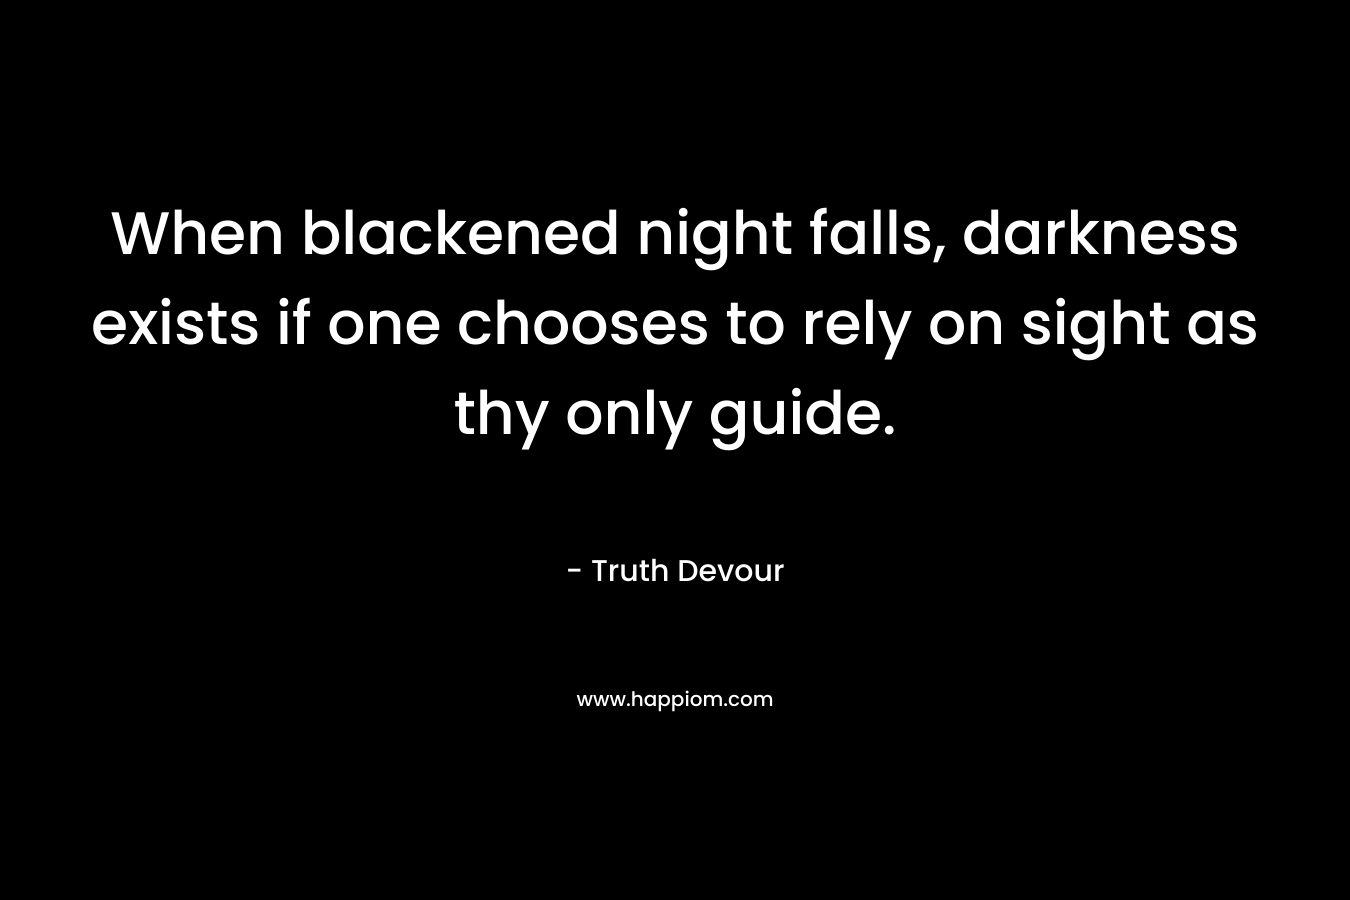 When blackened night falls, darkness exists if one chooses to rely on sight as thy only guide.